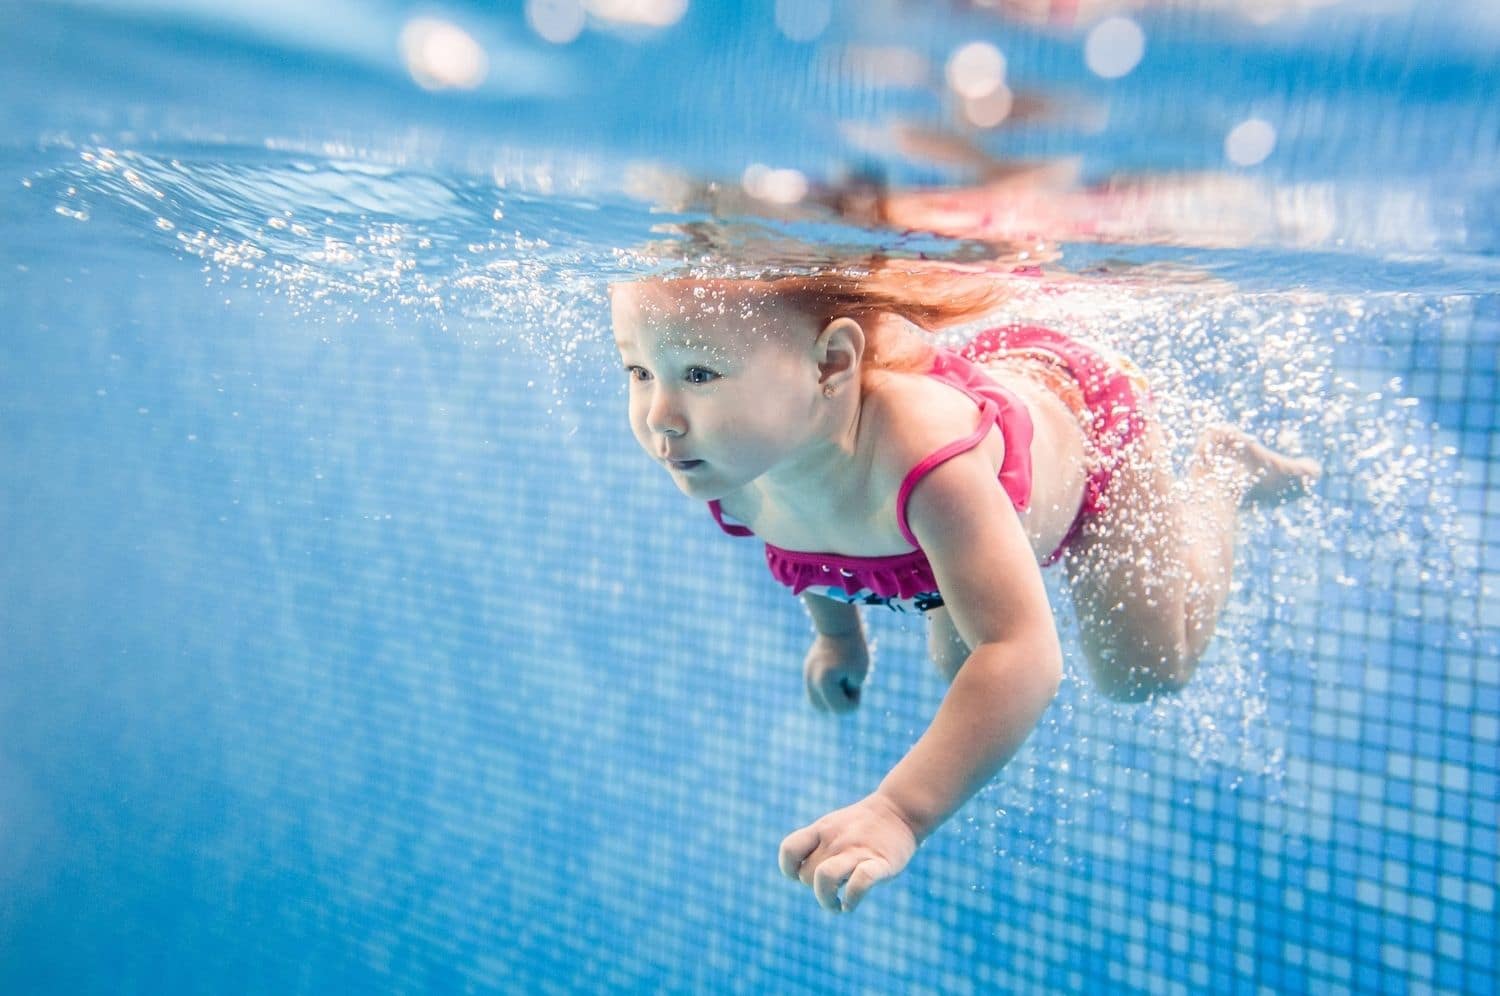 Why Does Your Baby Need Swimming Classes? Read to find out